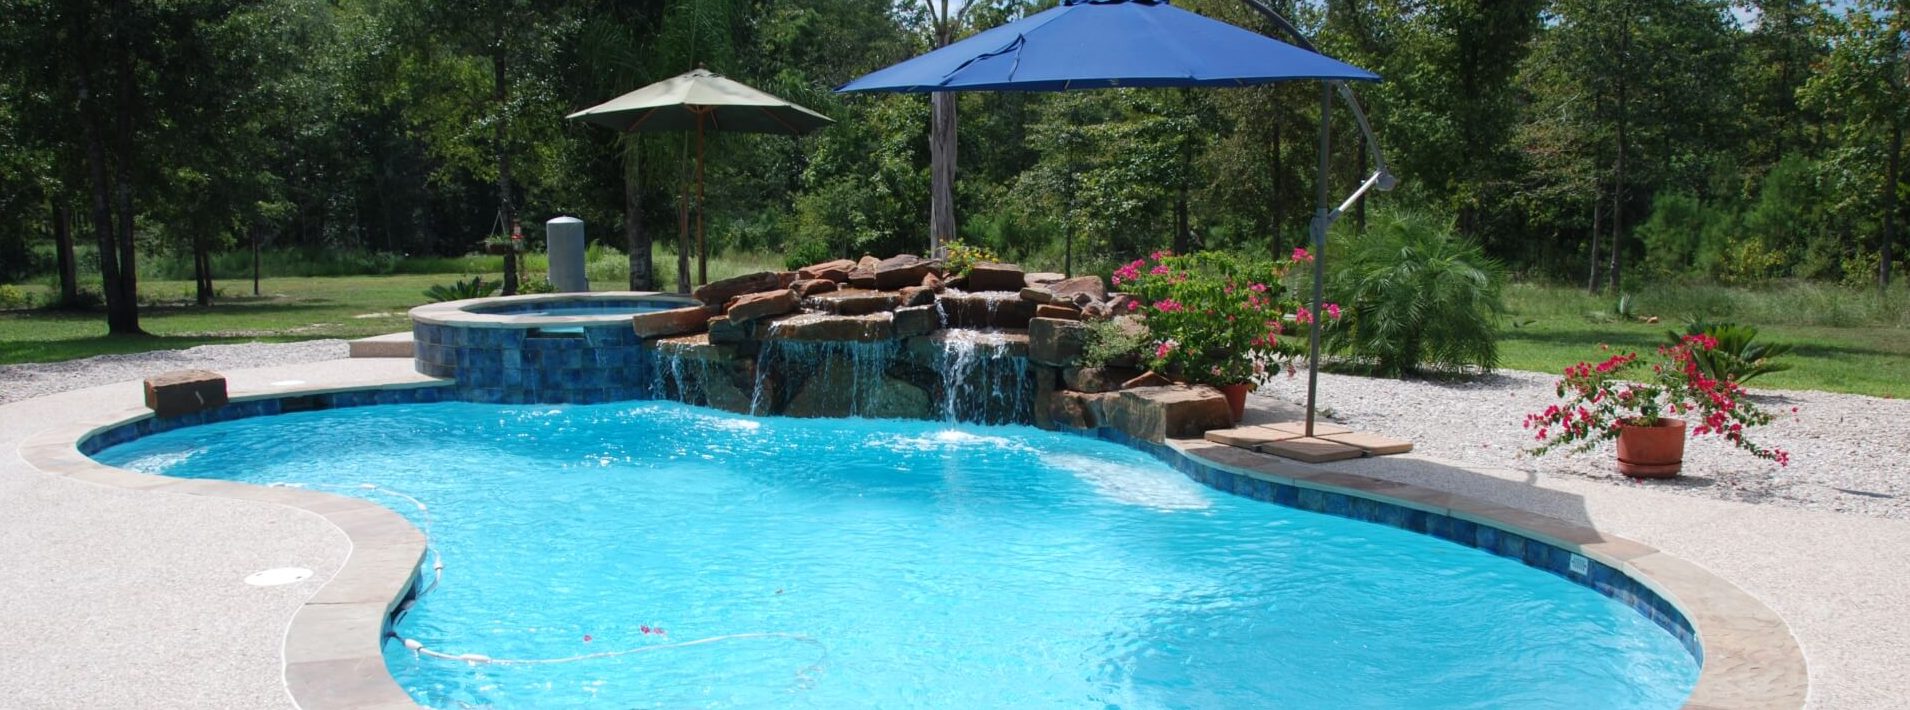 5 Ways to Plan Ahead for Next Year’s Pool Installation